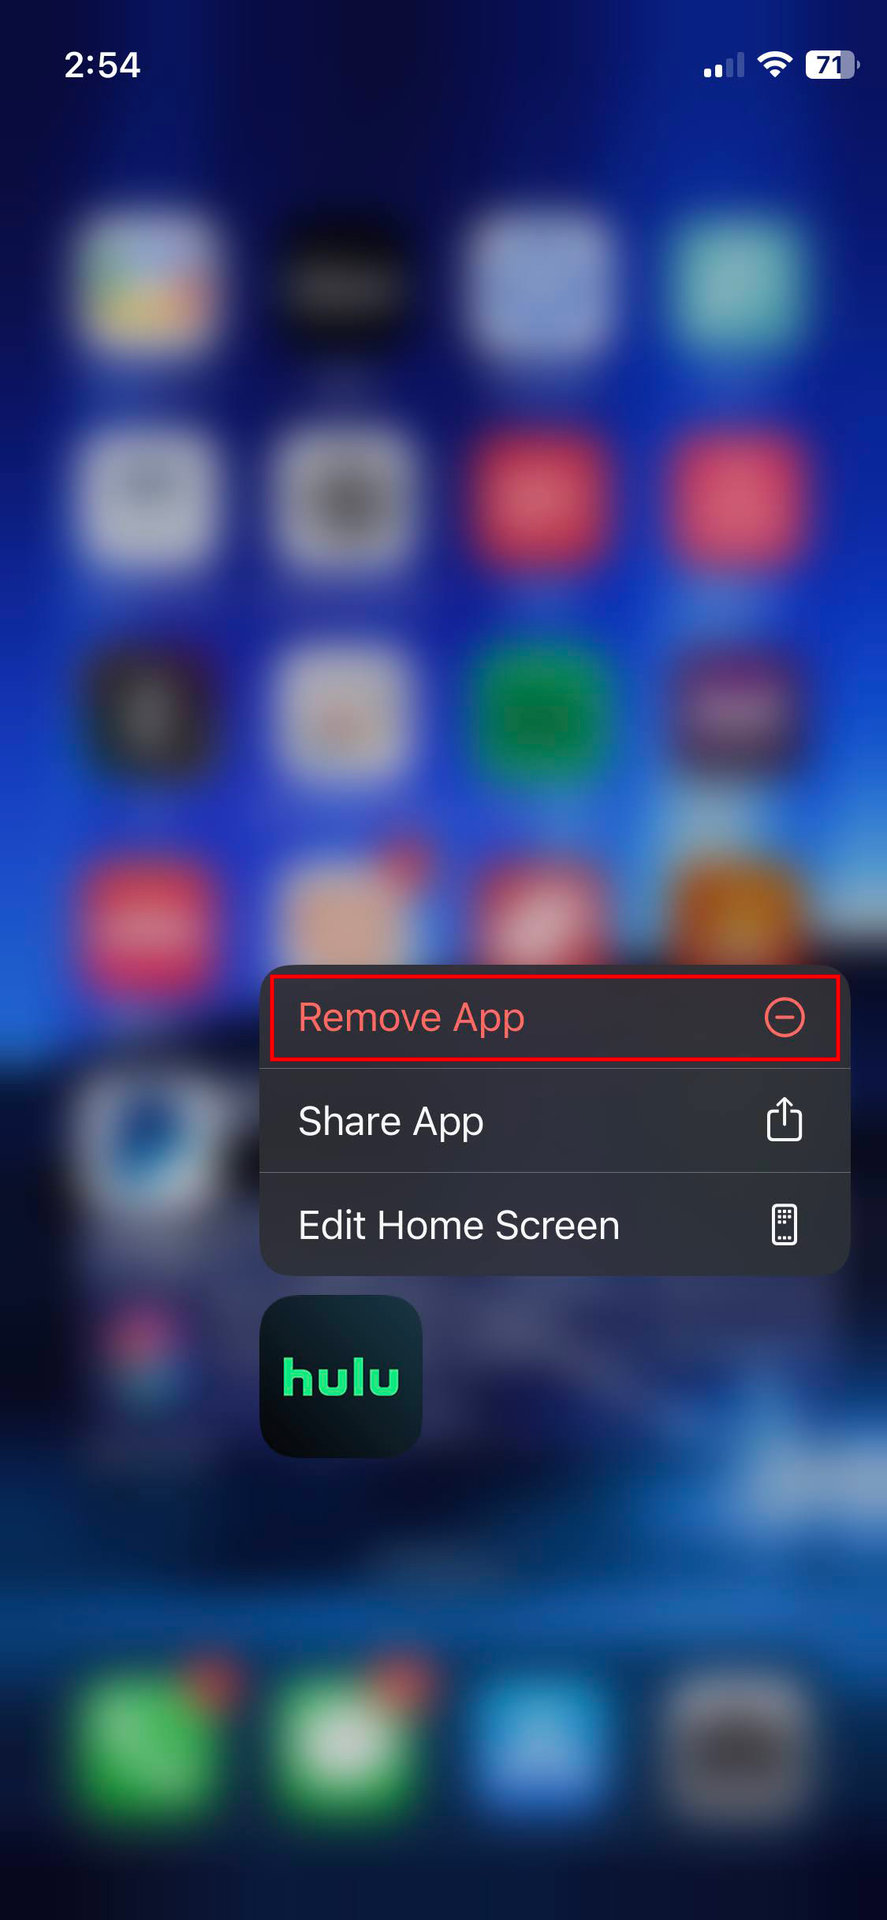 How to delete the Hulu app in iOS 2